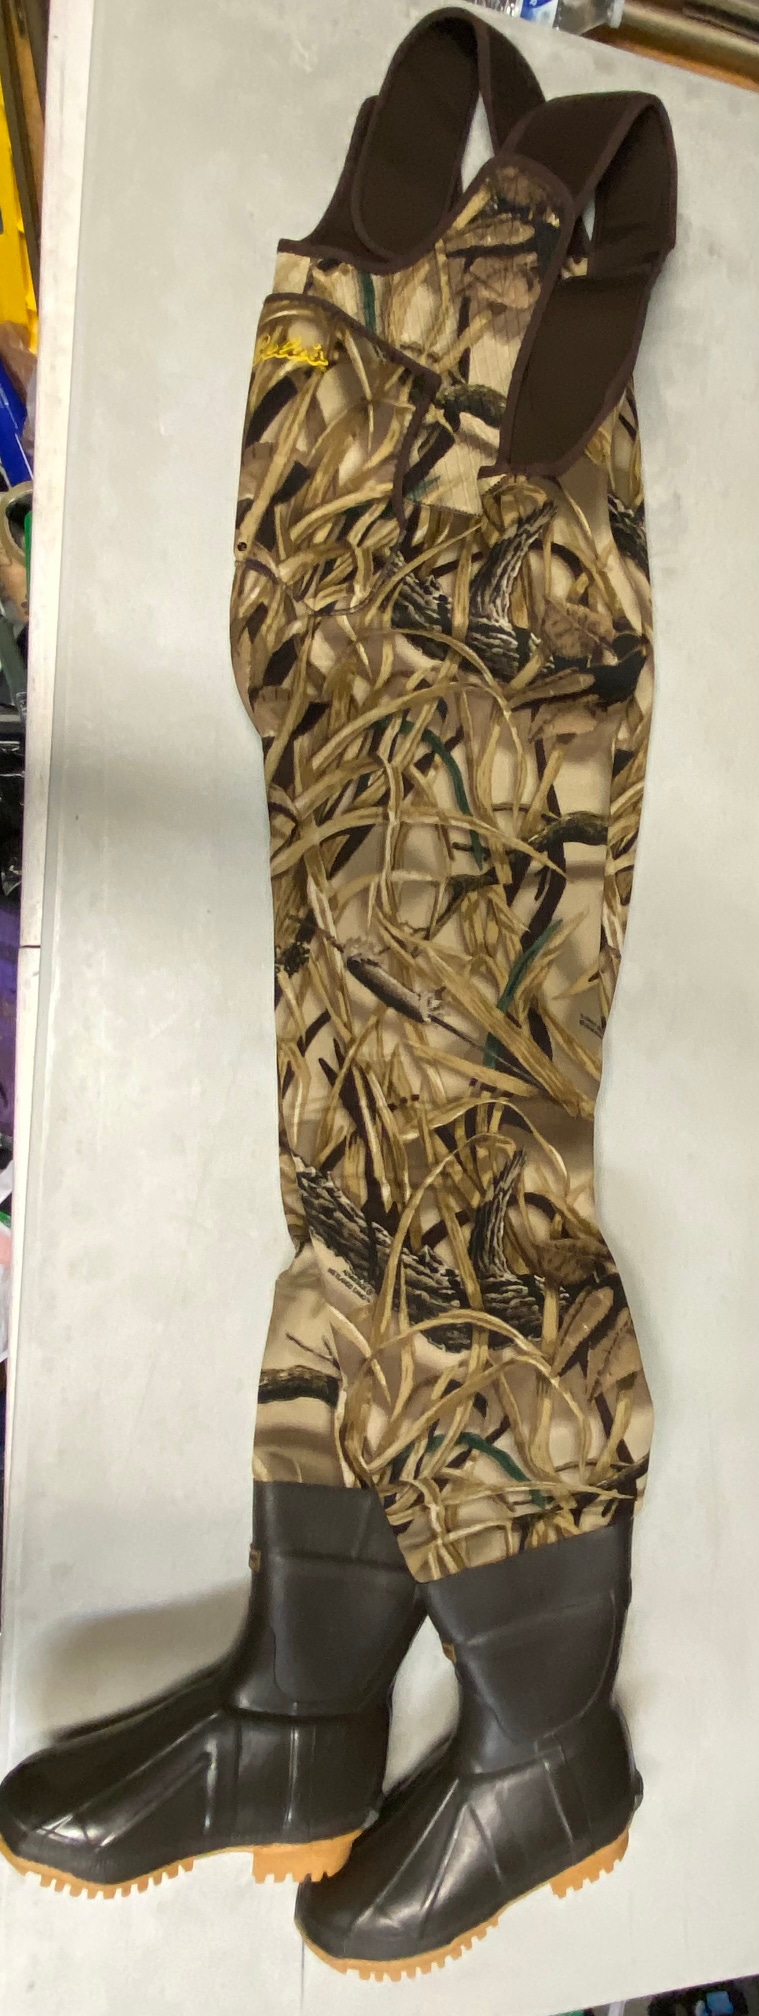 New camo Women's Cabela’s Adult Waders size 10